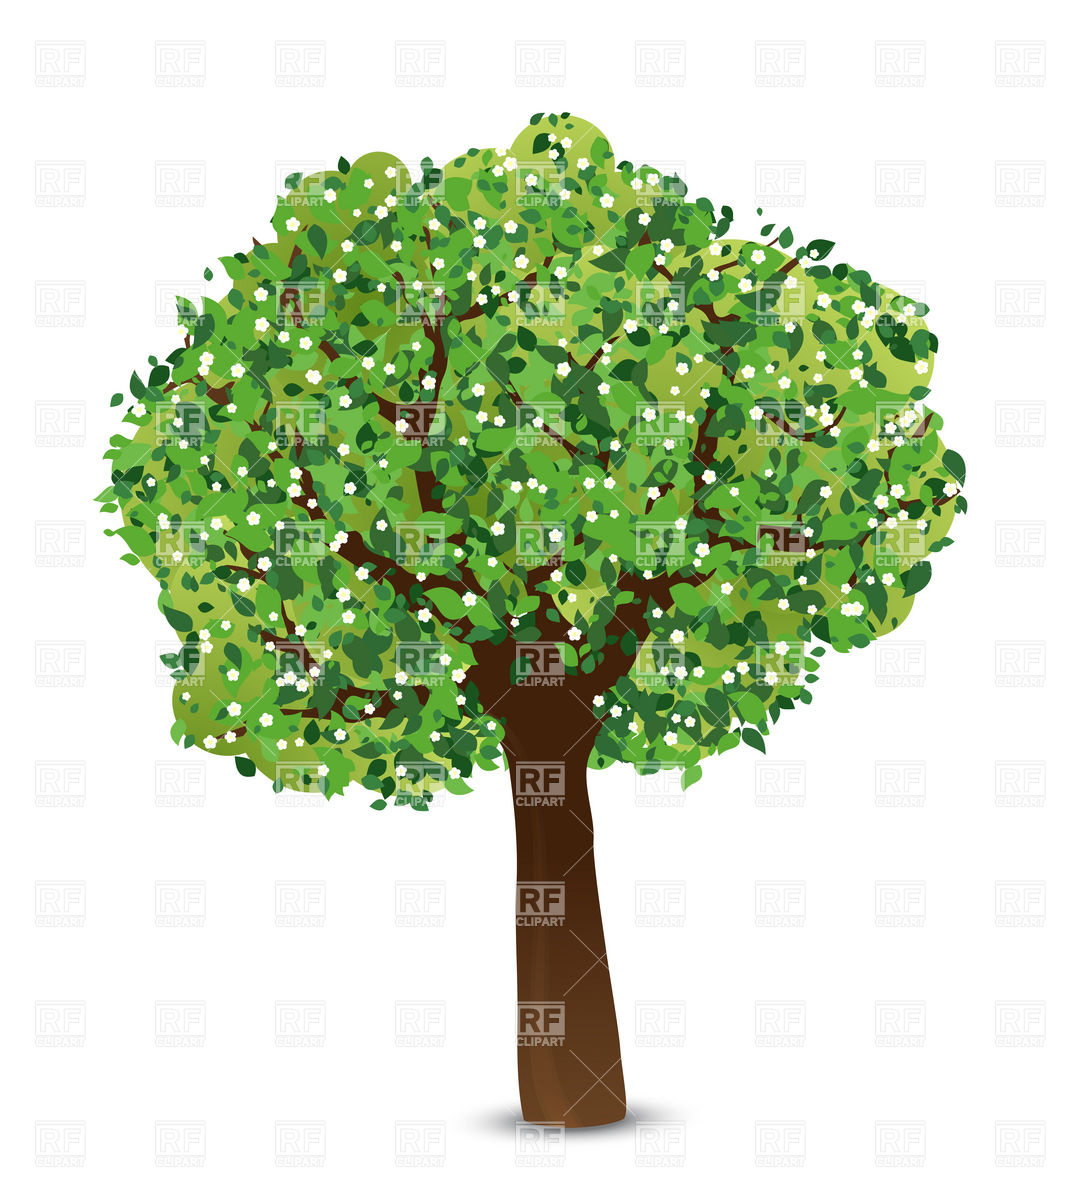 spring tree clipart